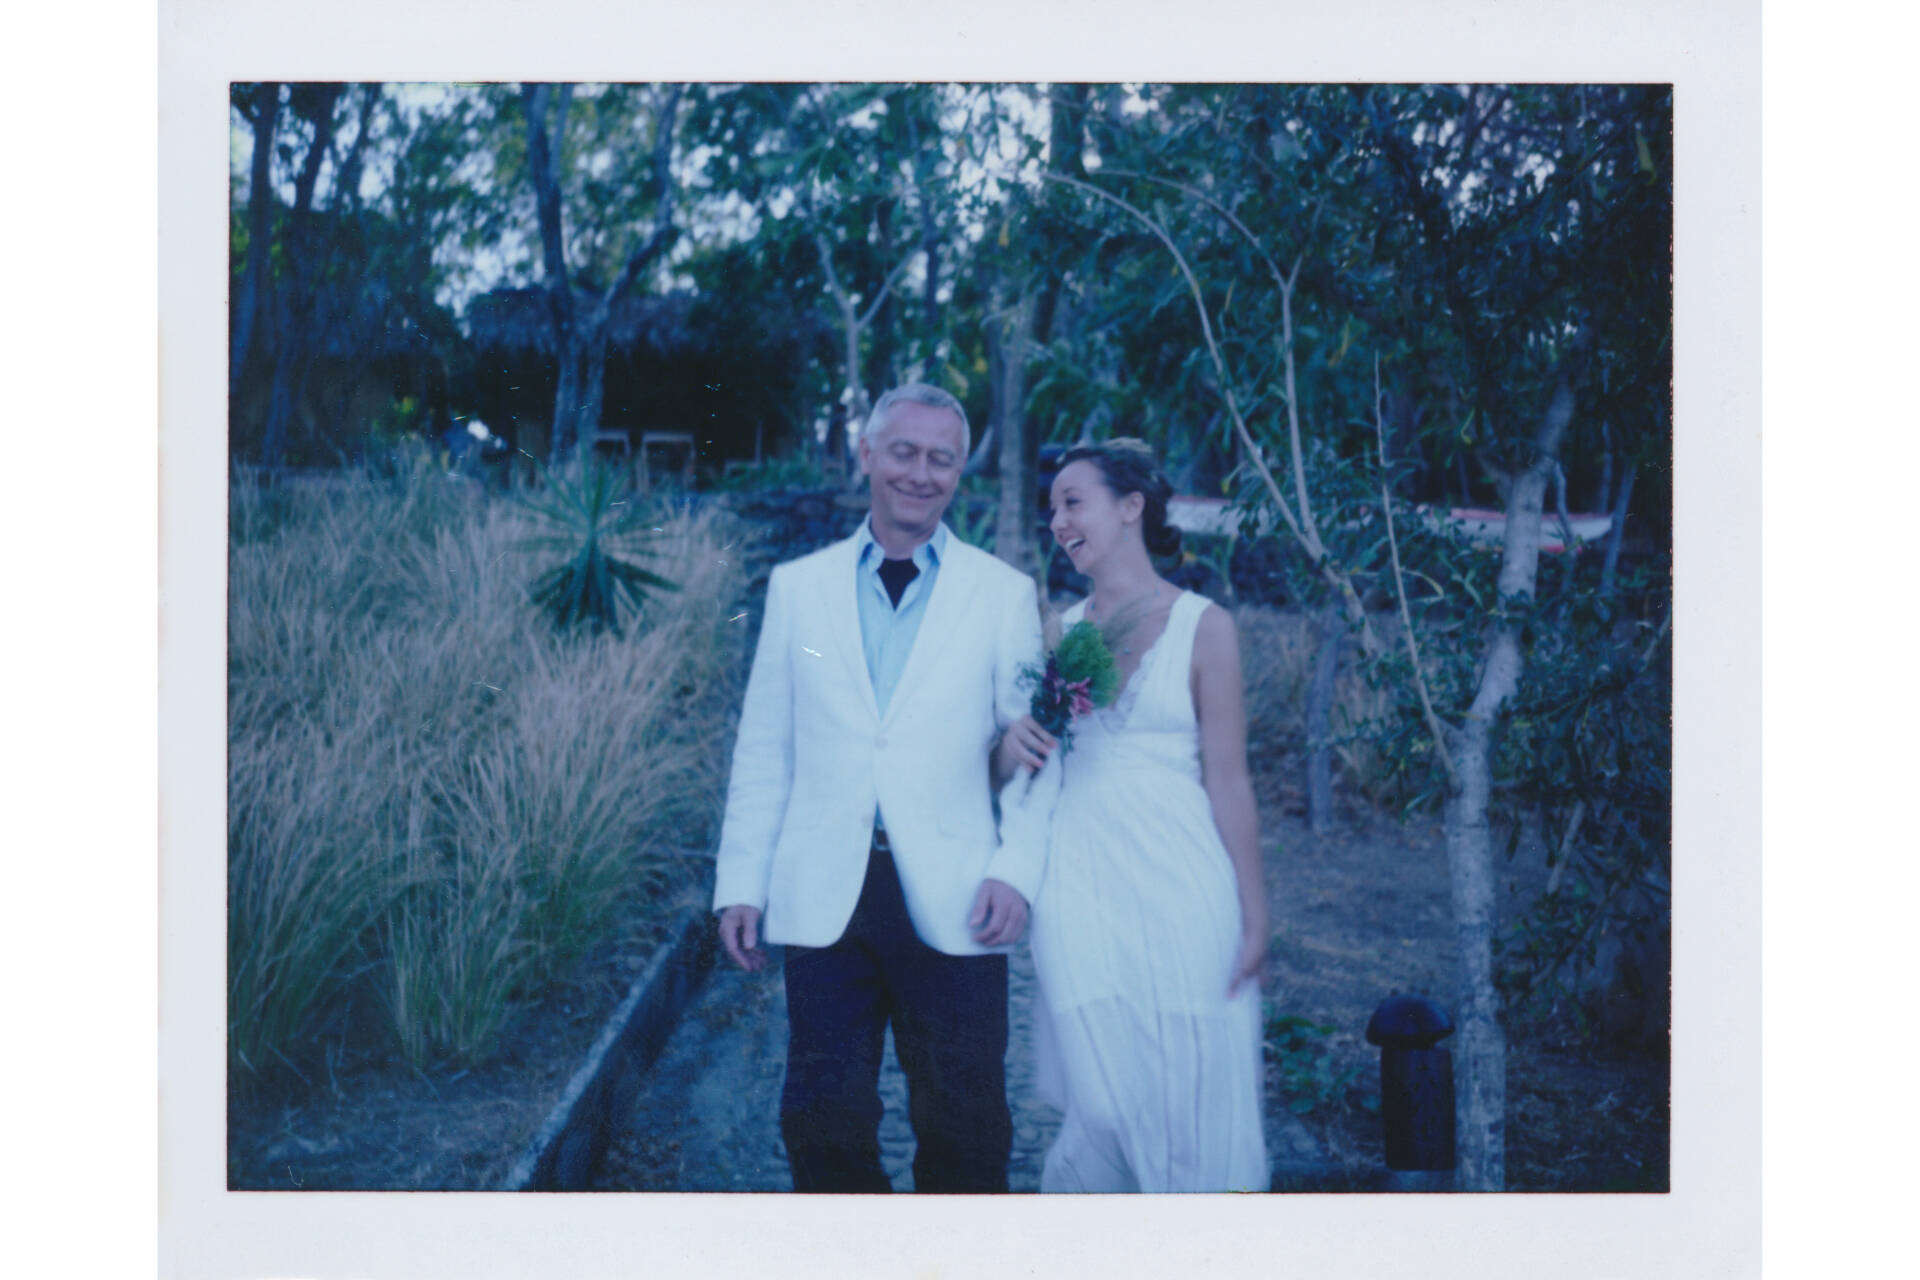 Nicole walking down the aisle with her dad at our wedding, shot on FB-100C film